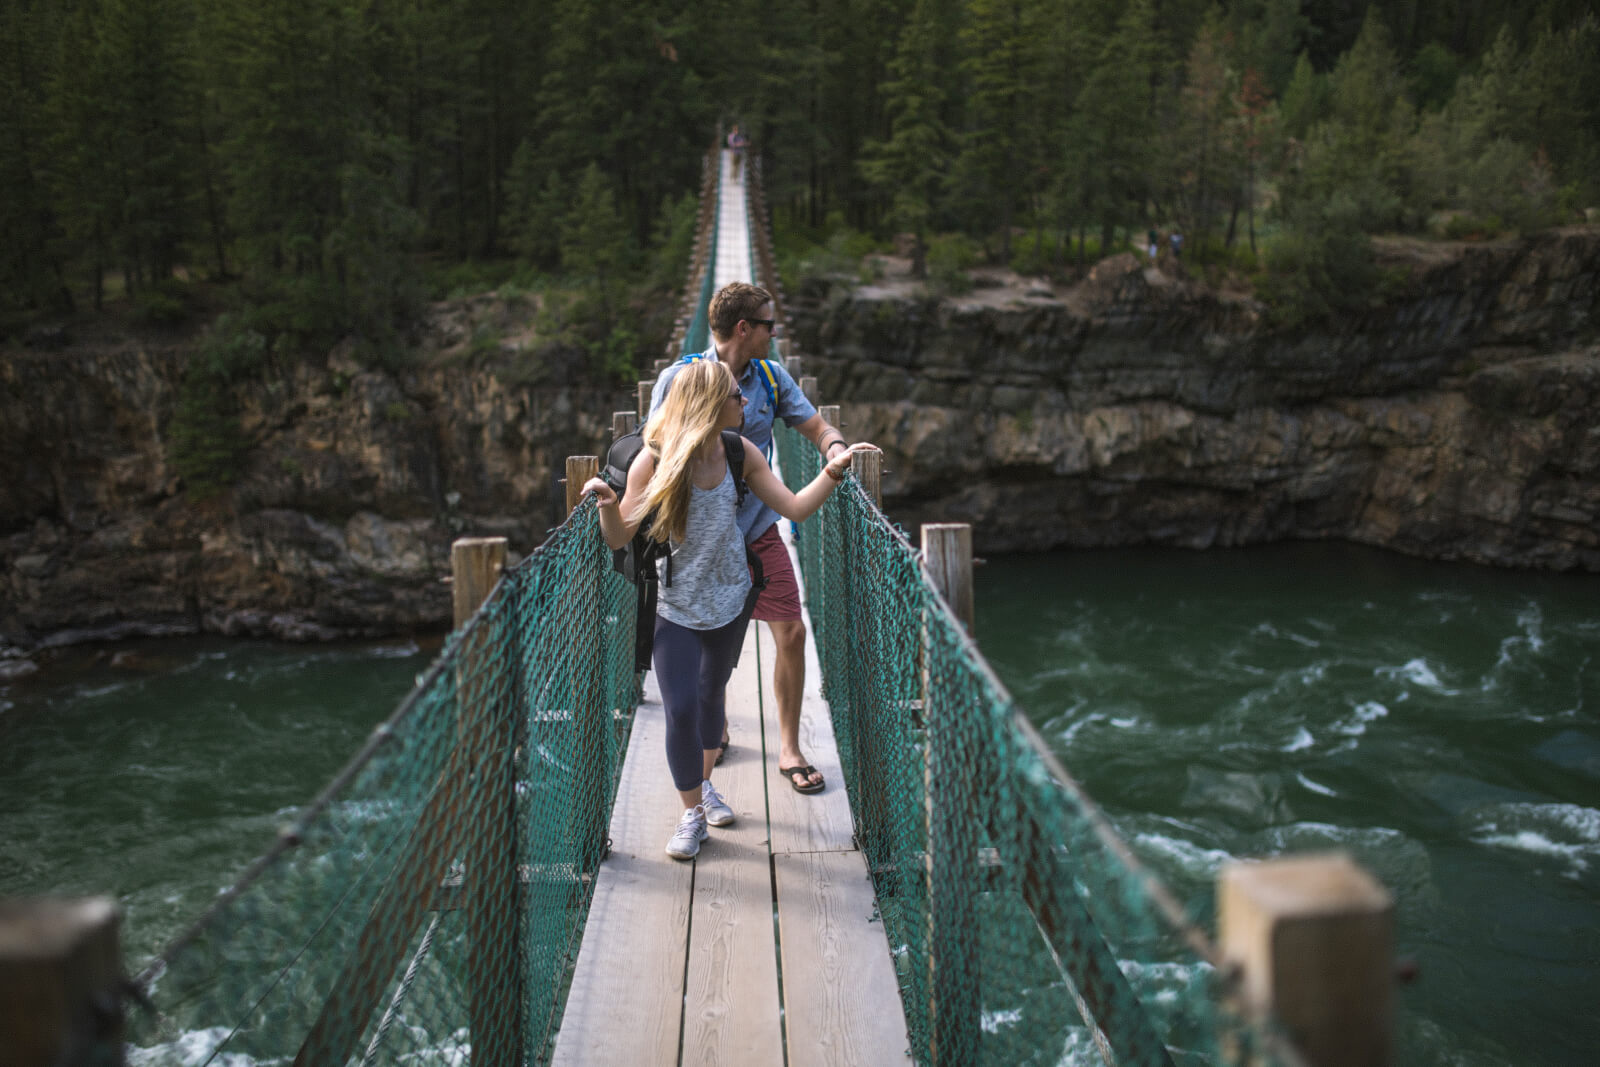 Visitors on a swinging bridge over a river in Glacier Country, Montana